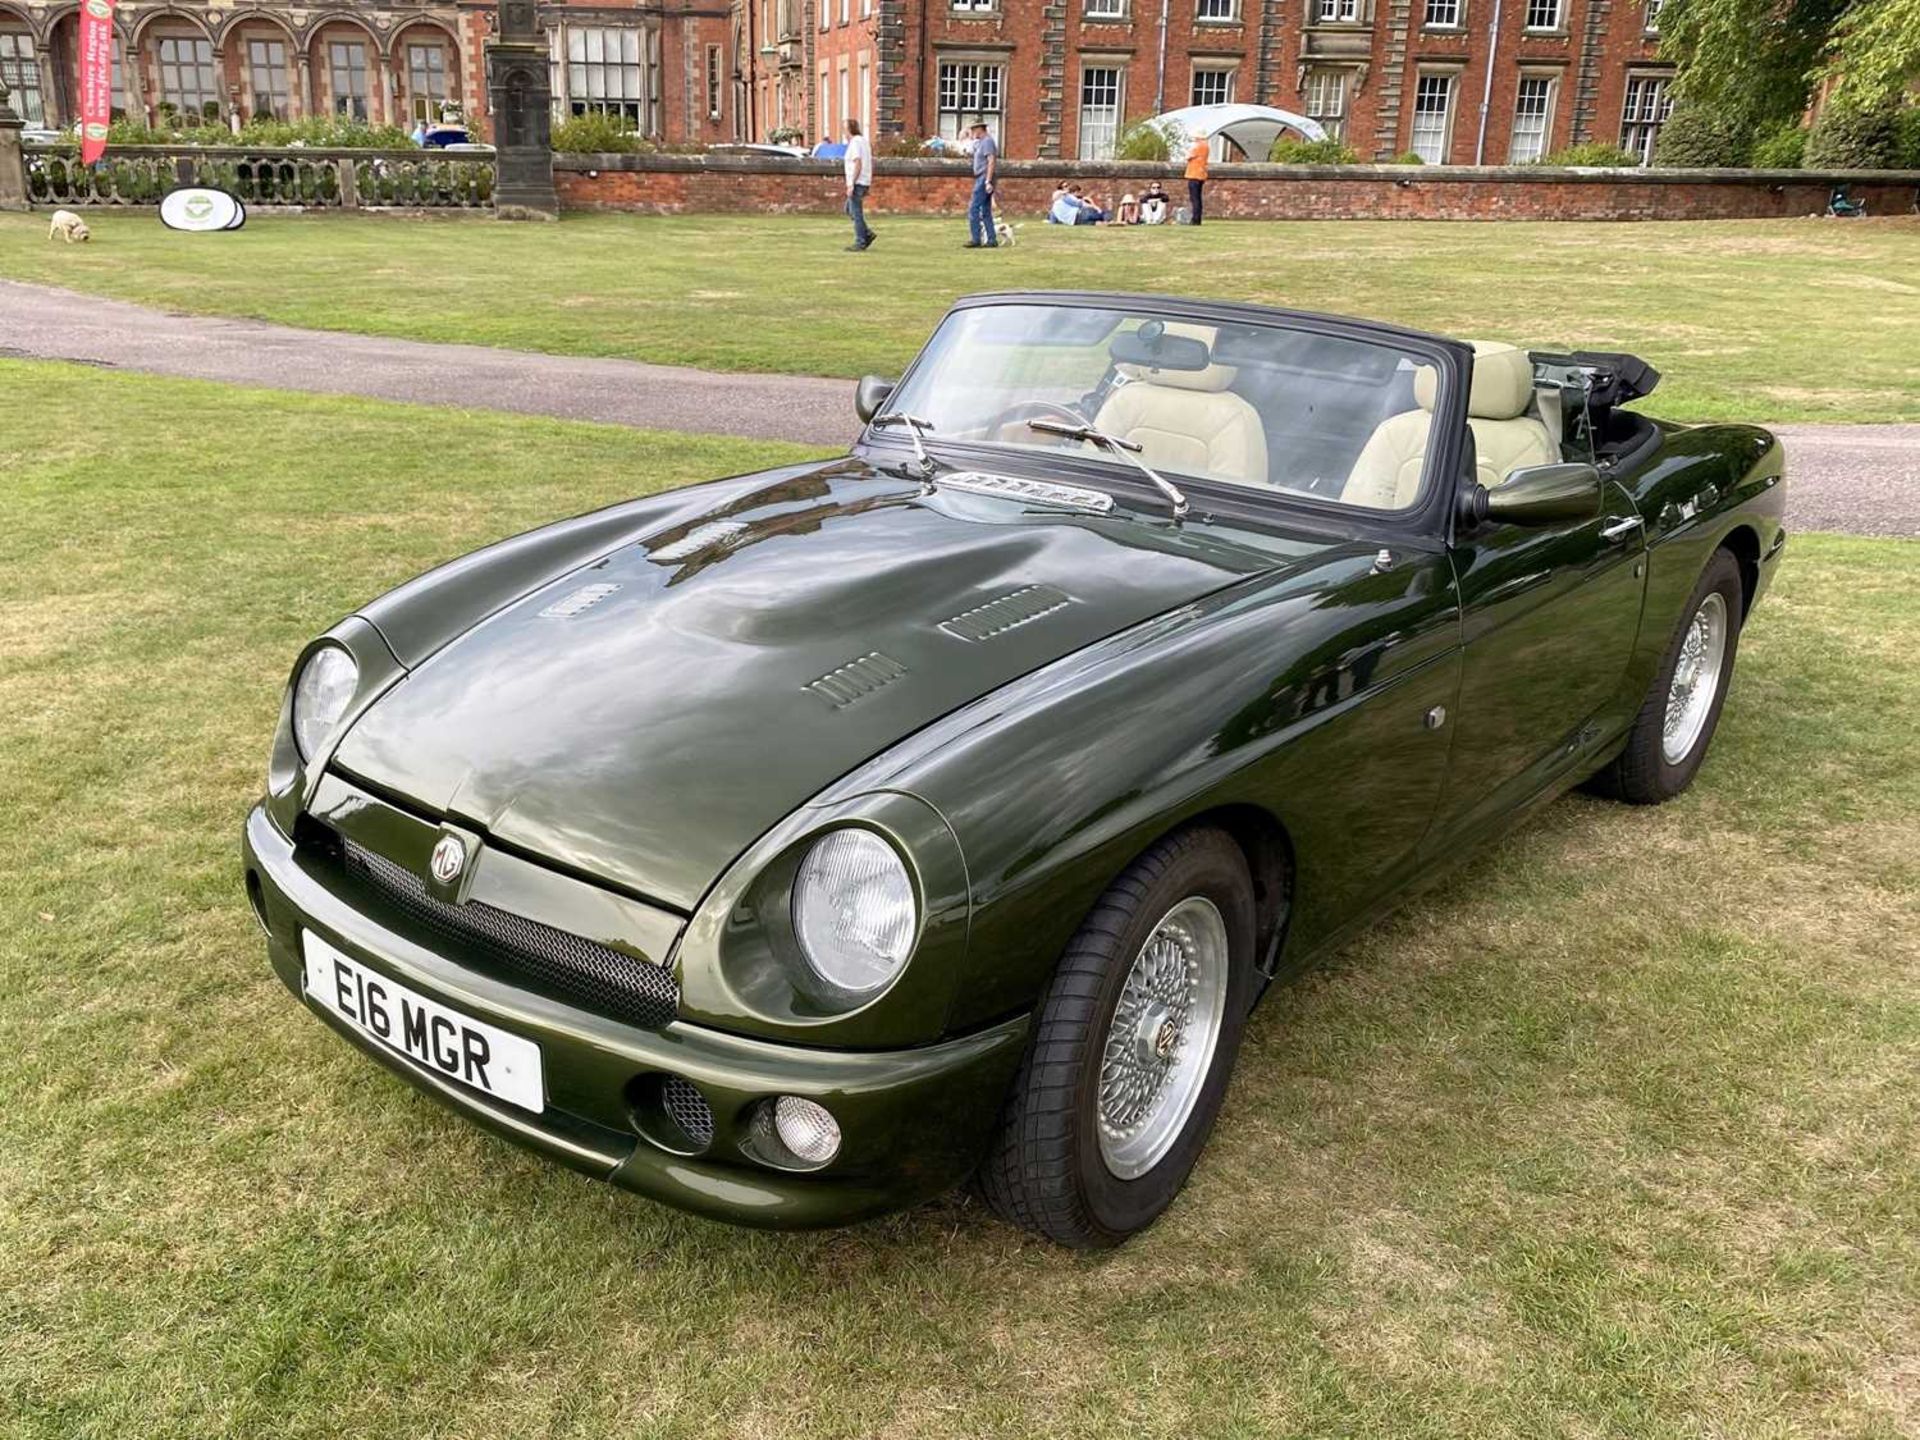 1995 MG RV8 A rare and sought-after car fitted with power steering - Image 5 of 45